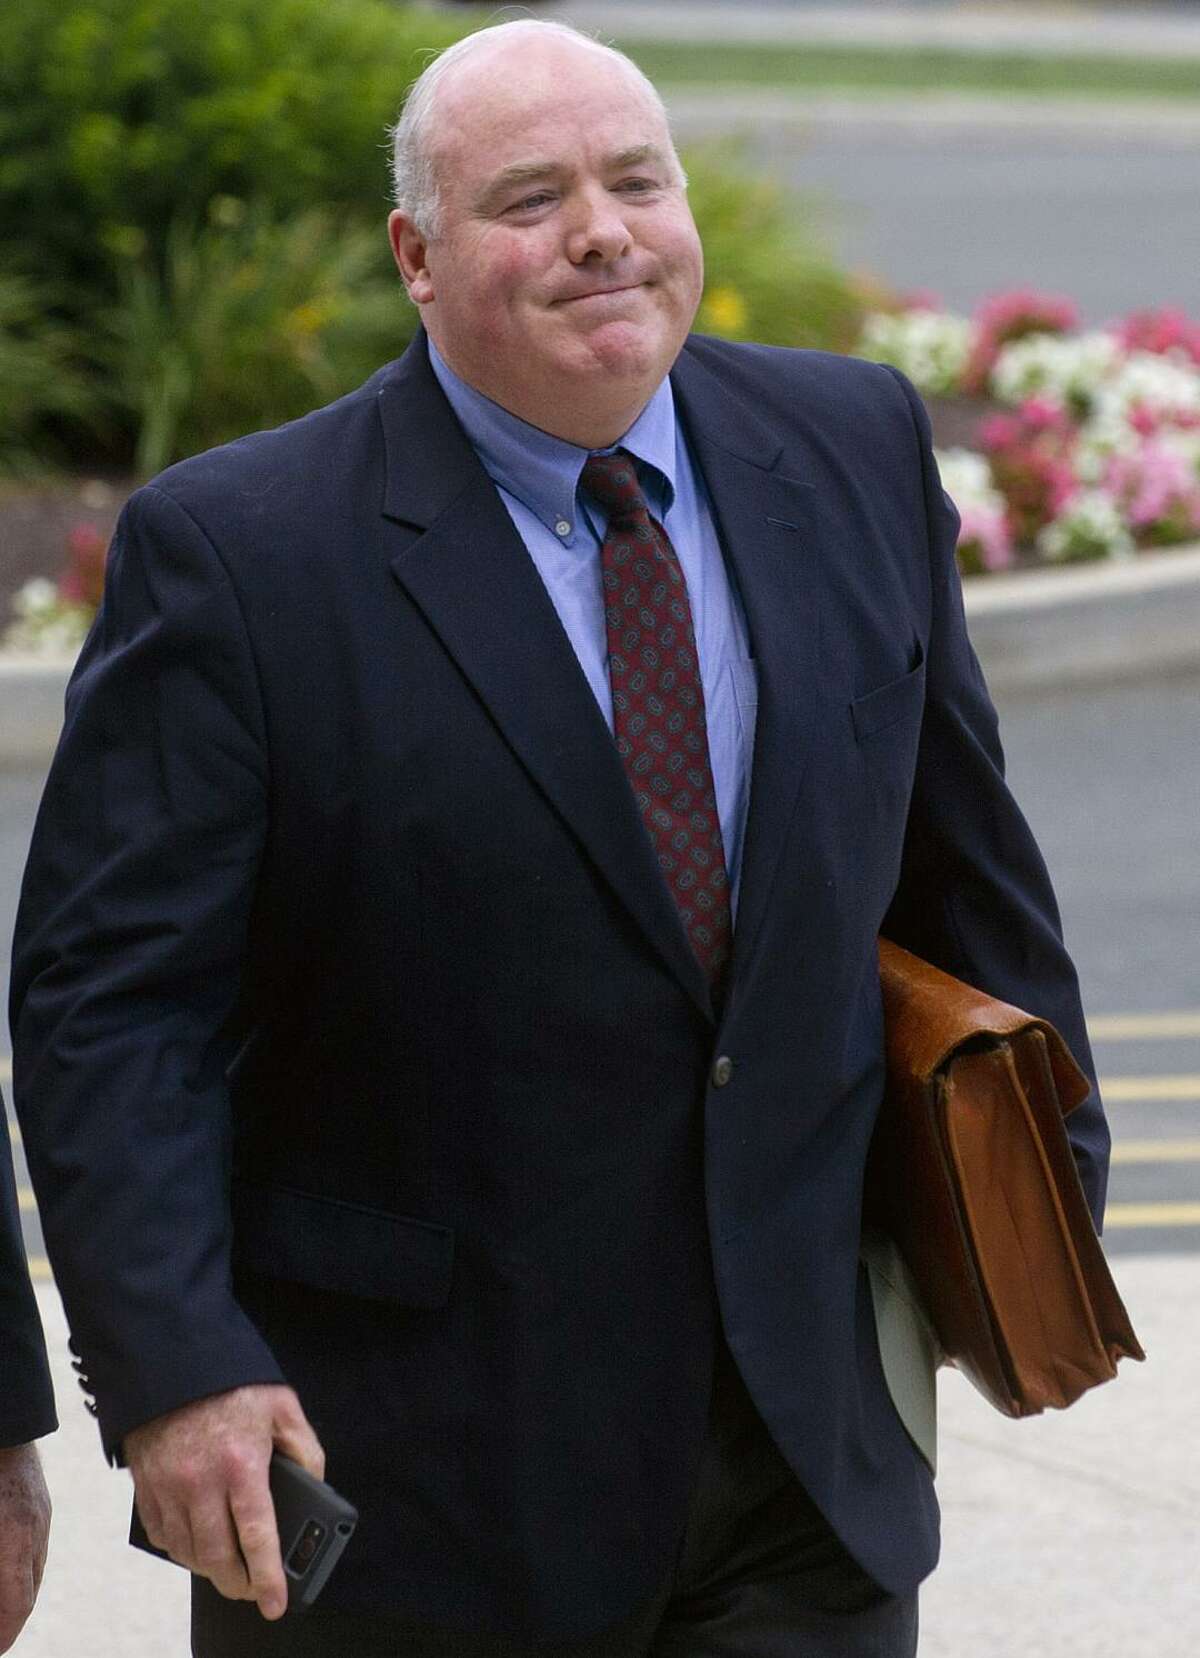 Michael Skakel arrives at State Superior Court in Stamford, Conn. in 2014.